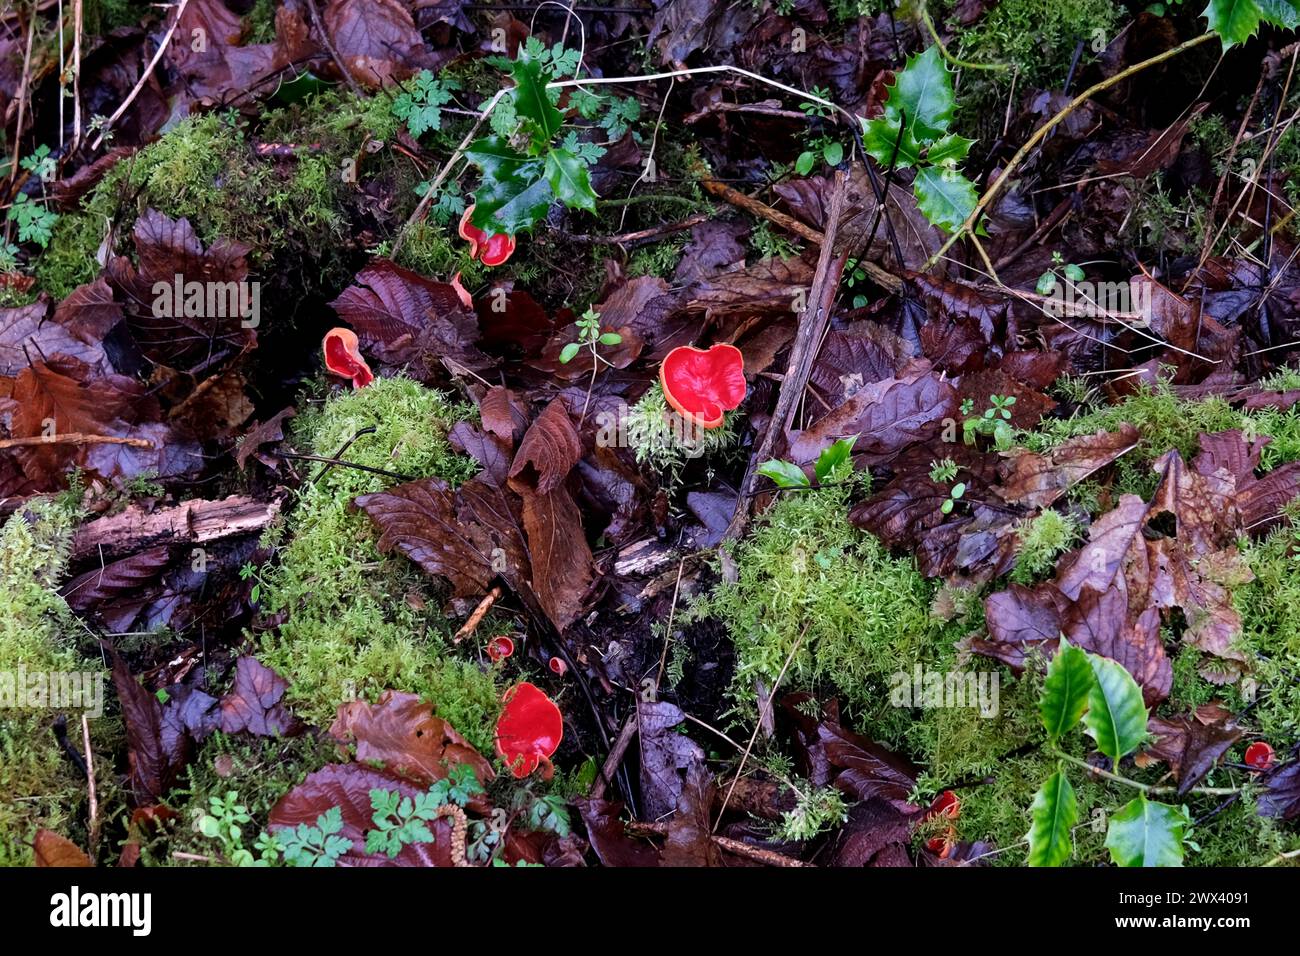 Scarlet Elf Cup or Scarlet Cup fungi growing on moss Sarcoscypha coccinea Stock Photo